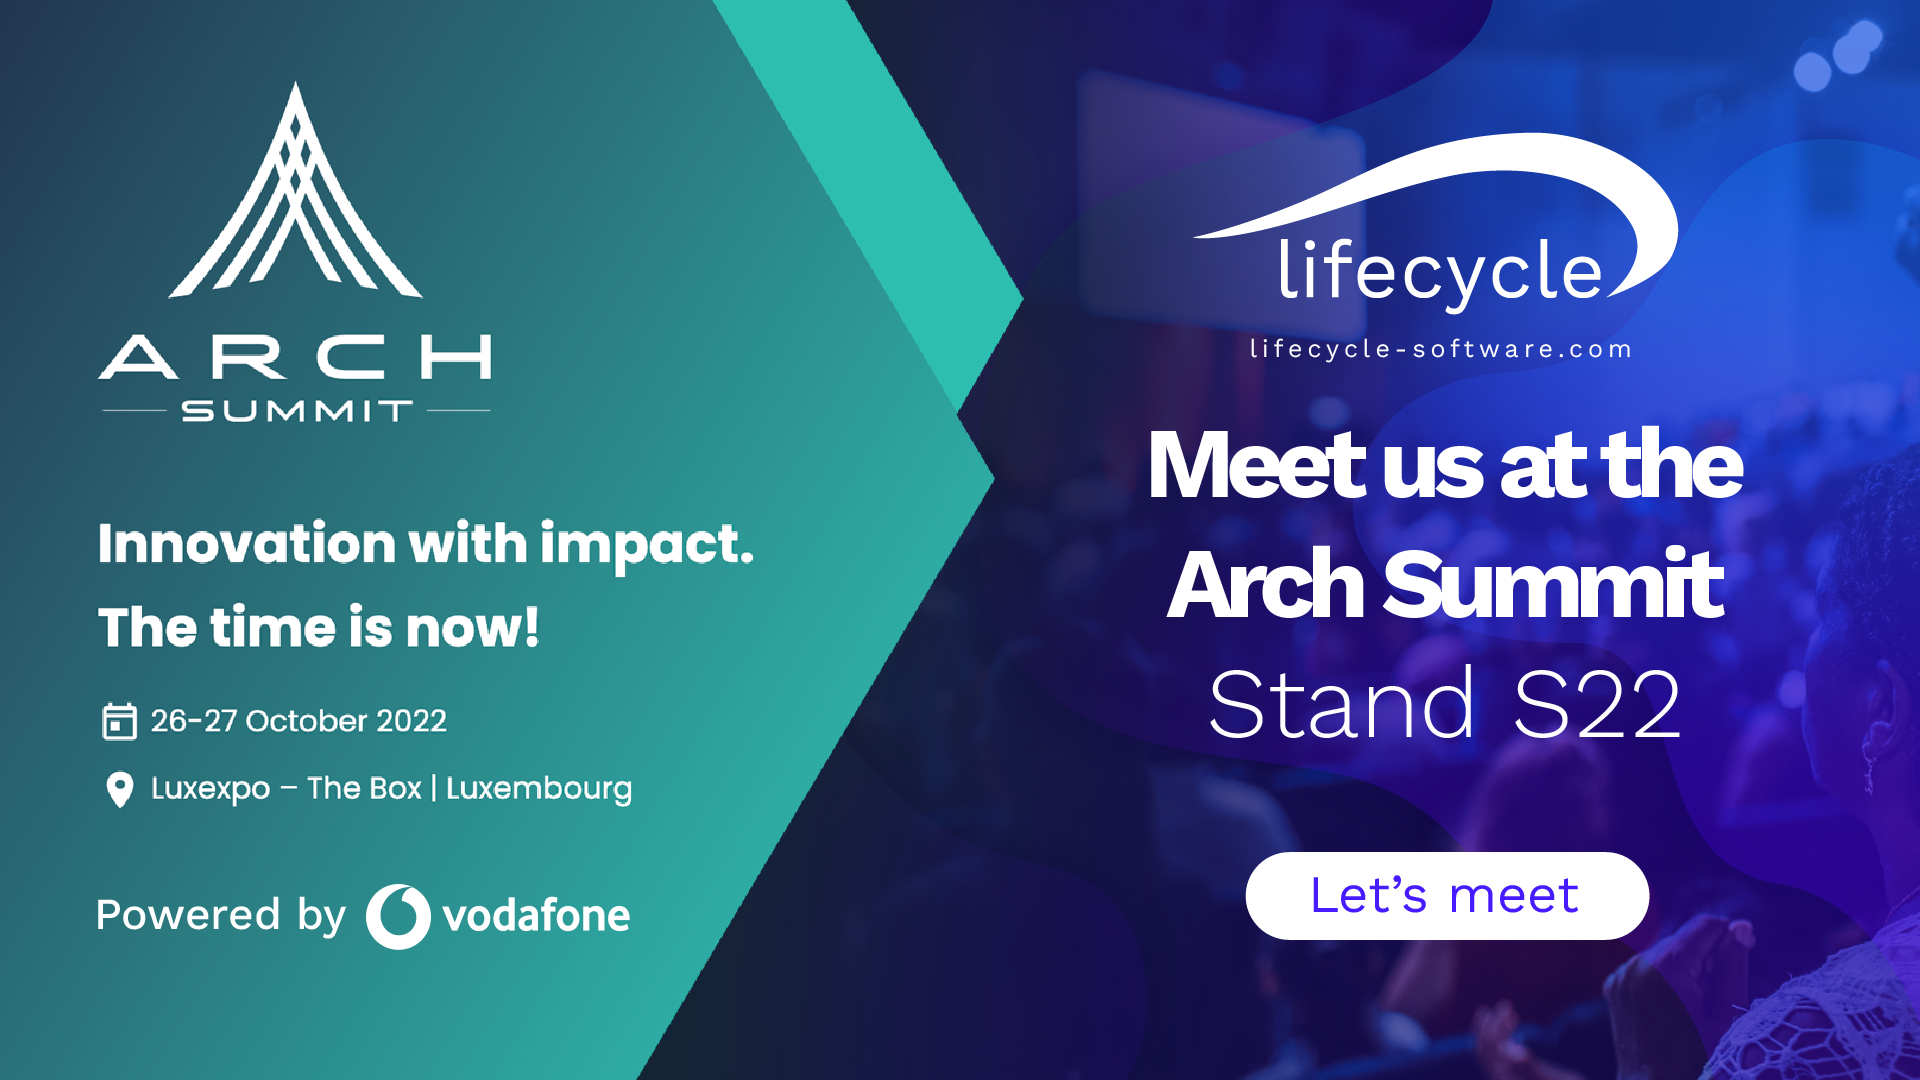 Meet us at the Arch Summit